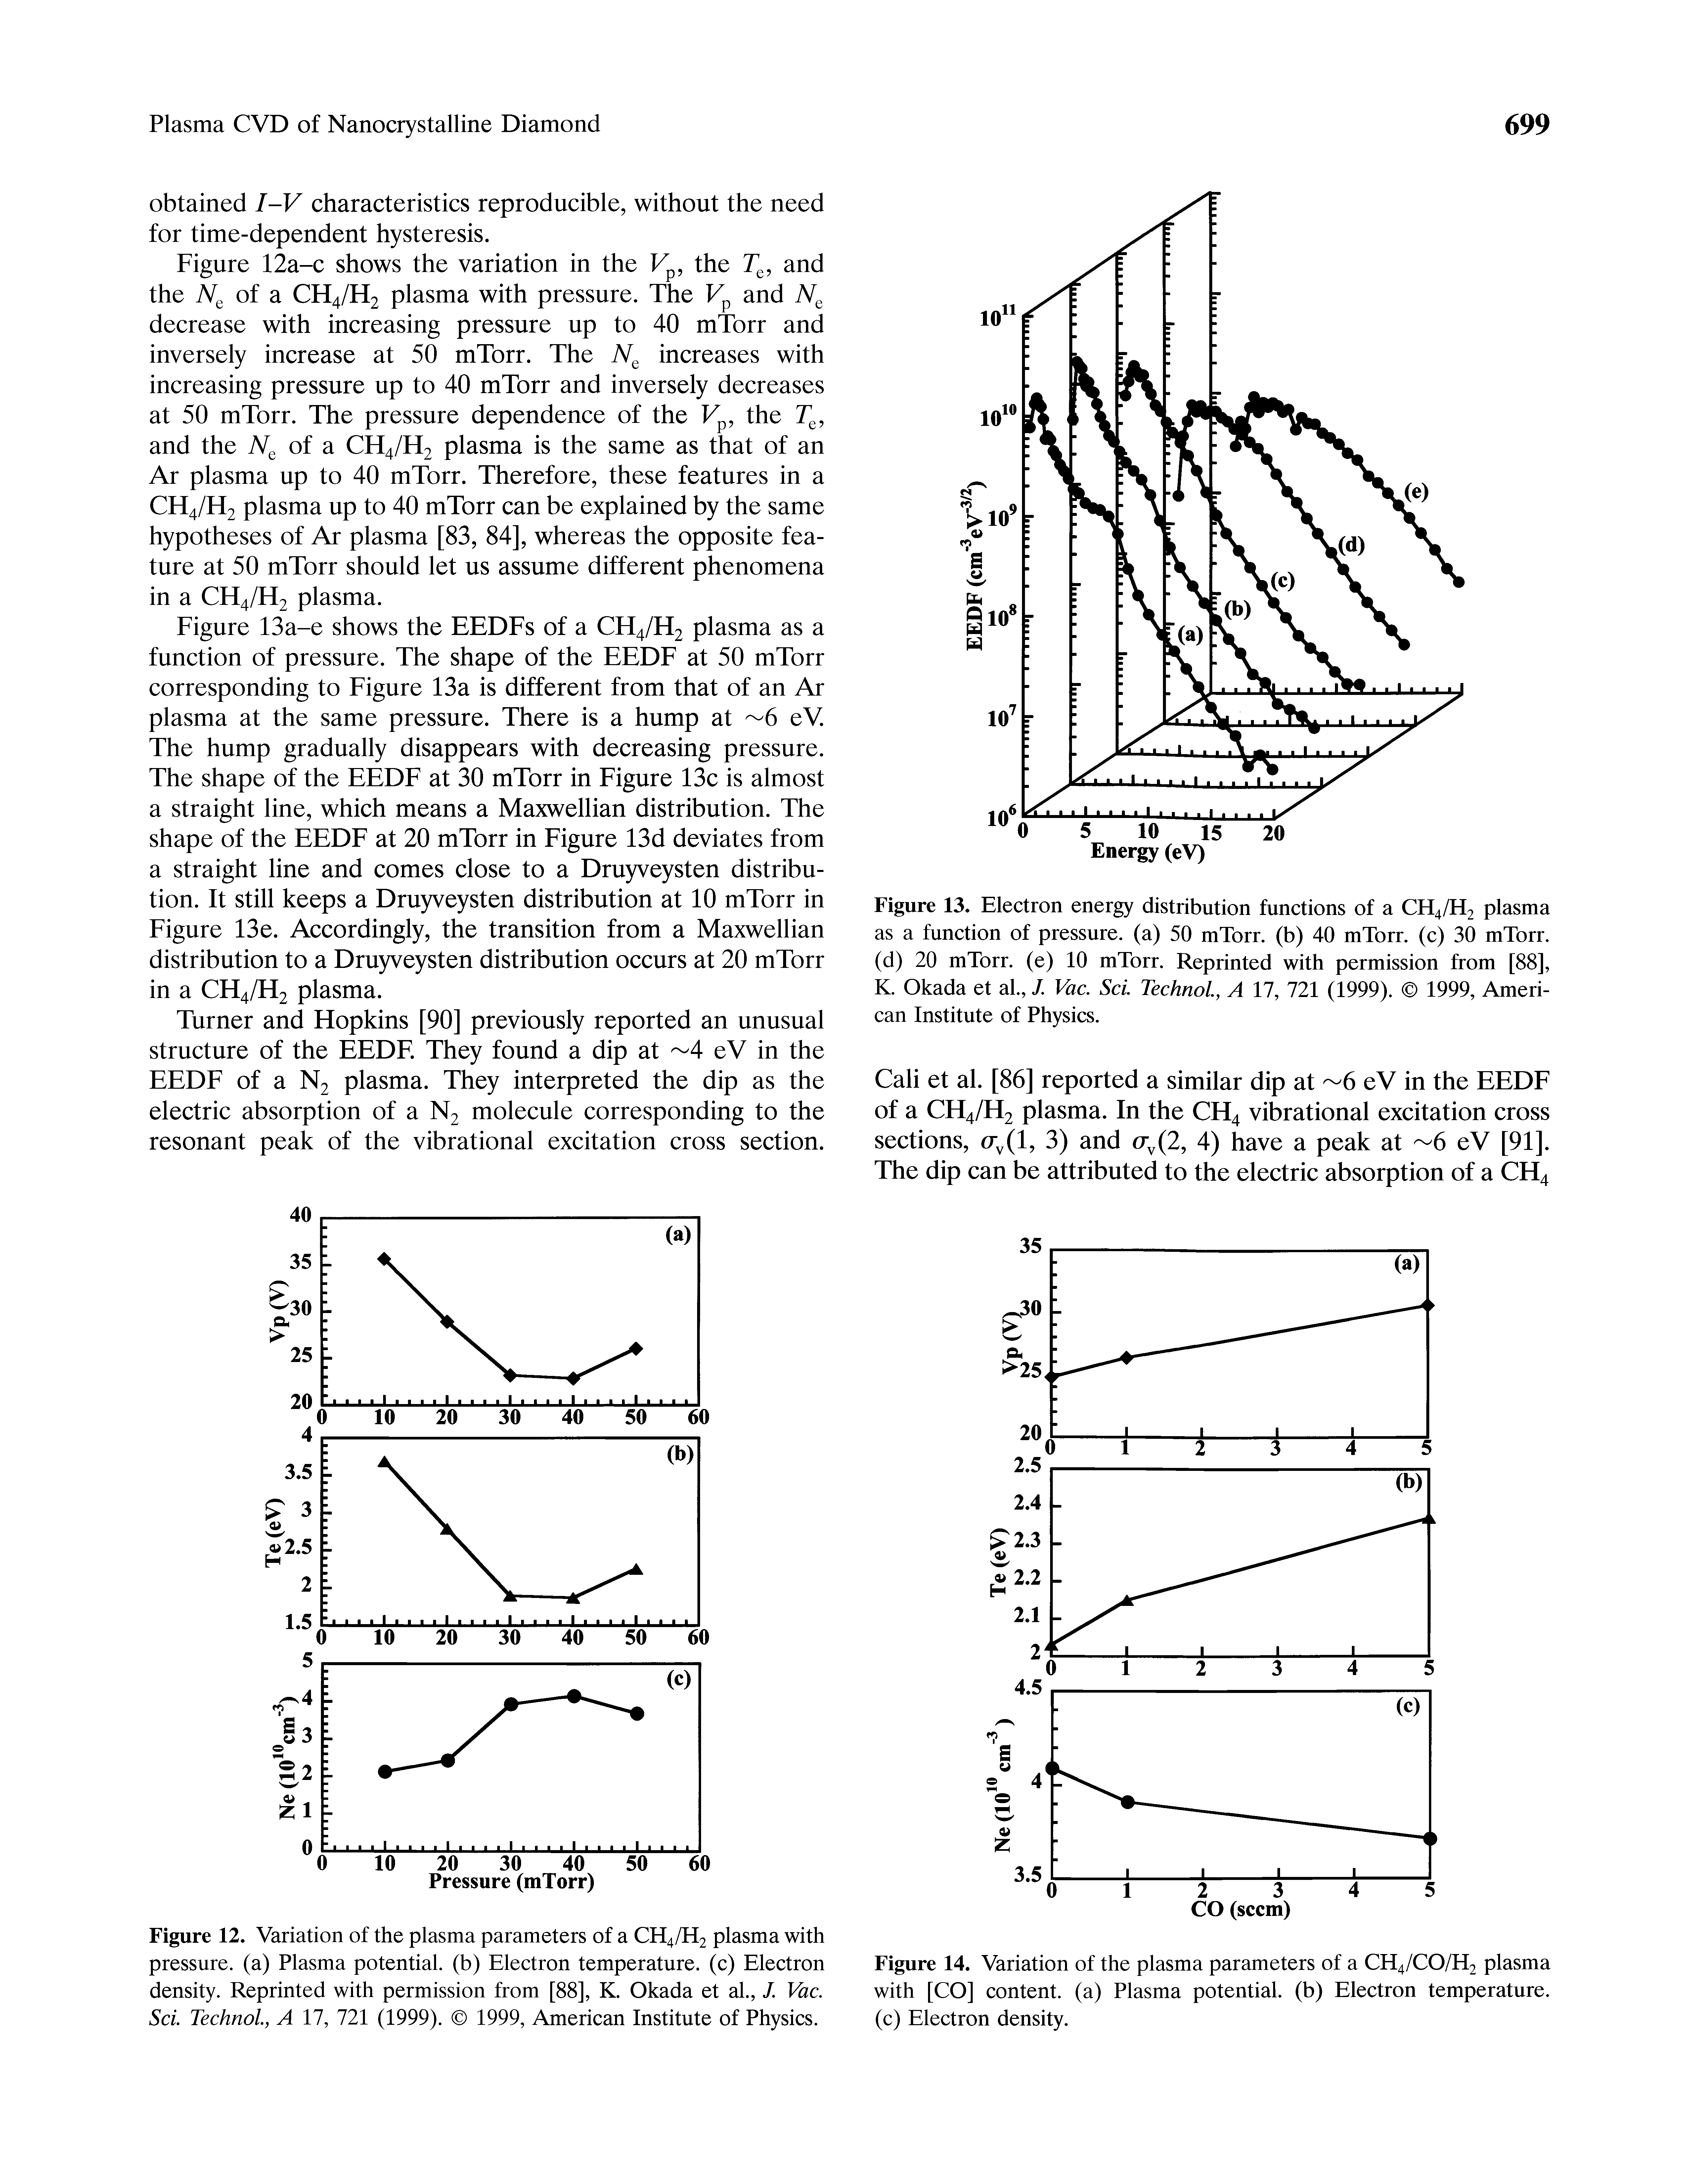 Figure 12. Variation of the plasma parameters of a CH4/H2 plasma with pressure, (a) Plasma potential, (b) Electron temperature, (c) Electron density. Reprinted with permission from [88], K. Okada et al., /. Vac. Sci. TechnoL, A 17, 721 (1999). 1999, American Institute of Physics.